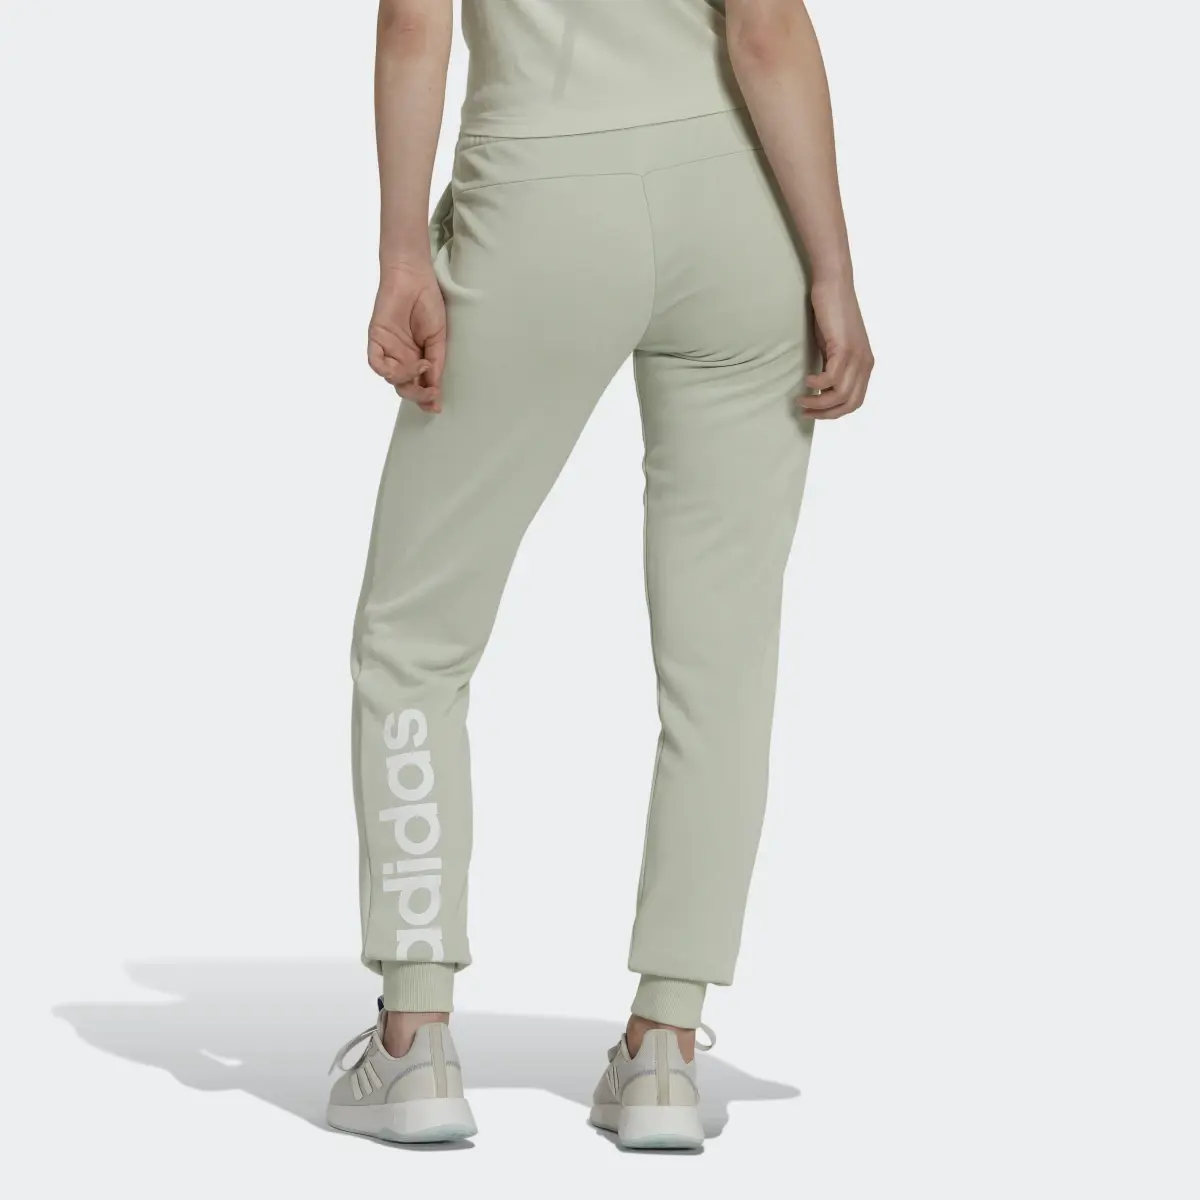 Adidas Essentials French Terry Logo Pants. 2